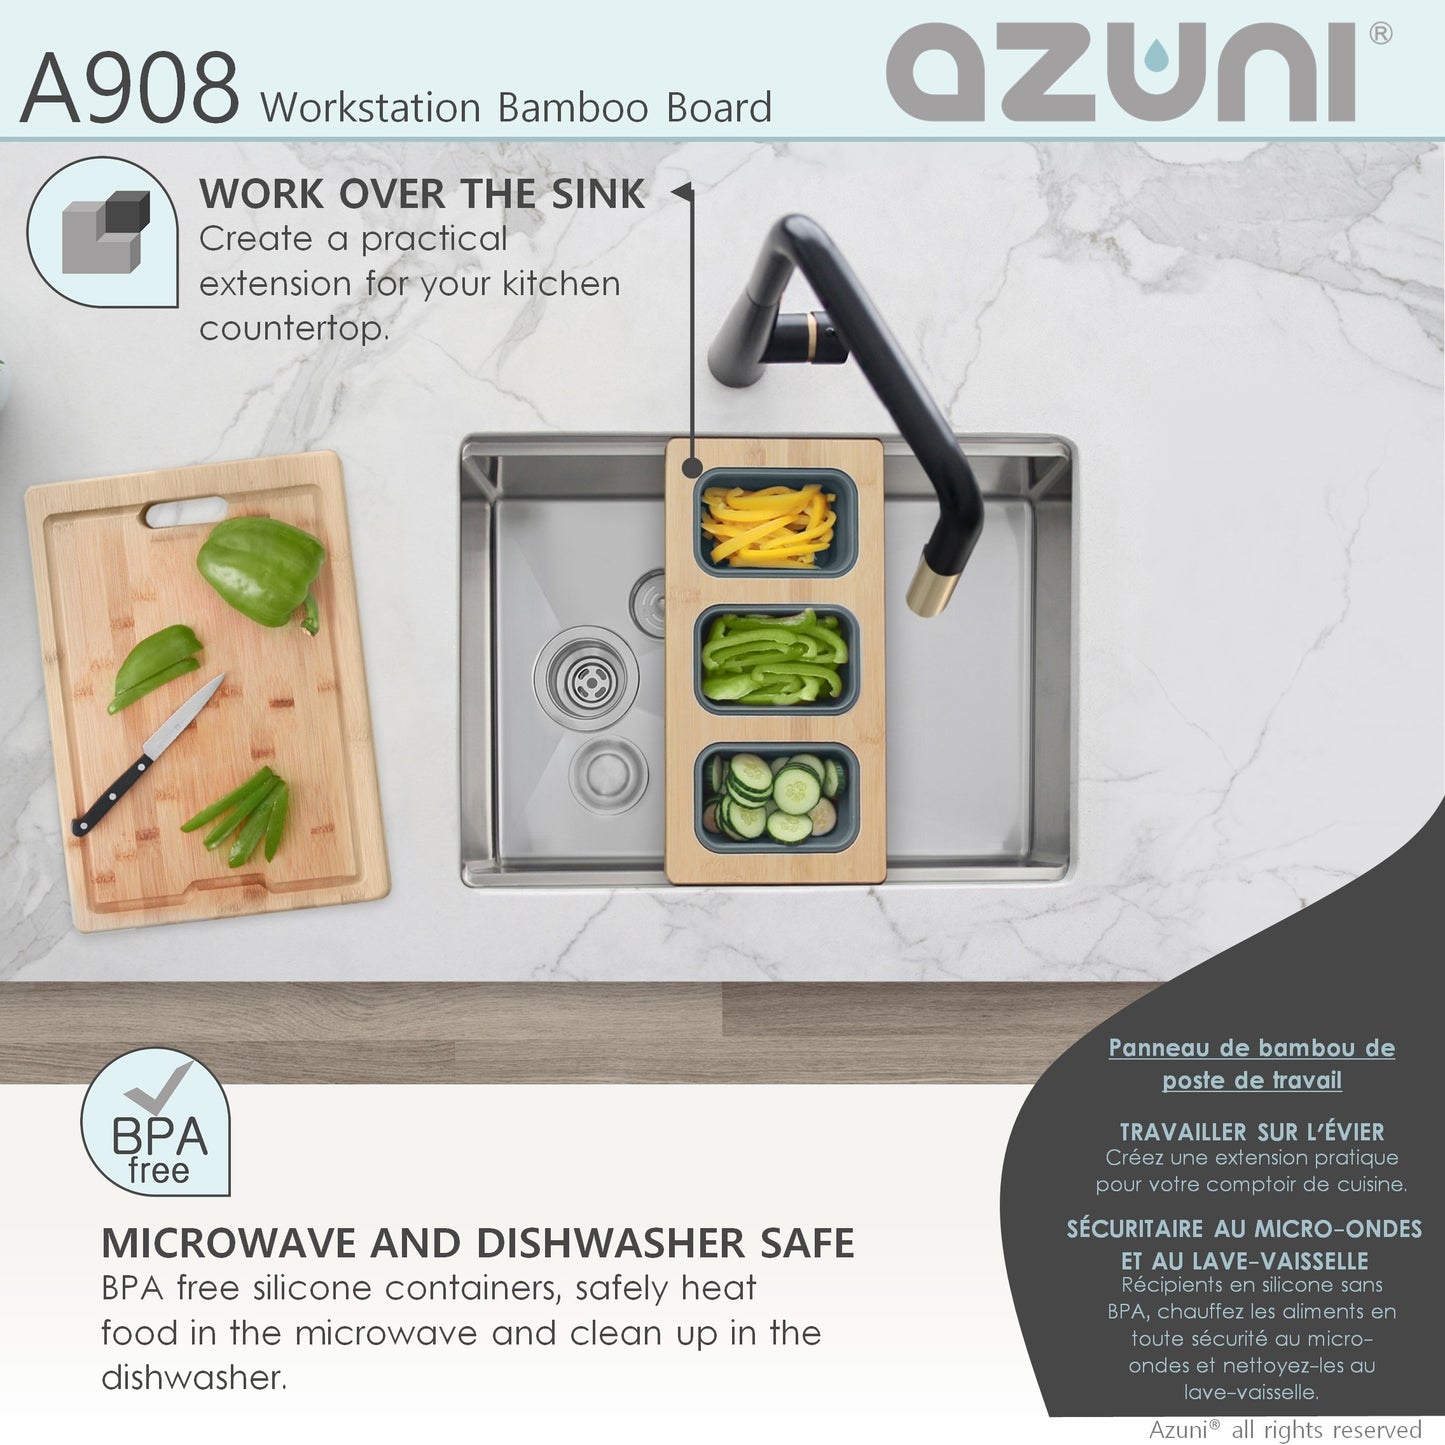 AZUNI 17" Workstation Sink Bamboo Serving Board set with 3 Collapsible Containers